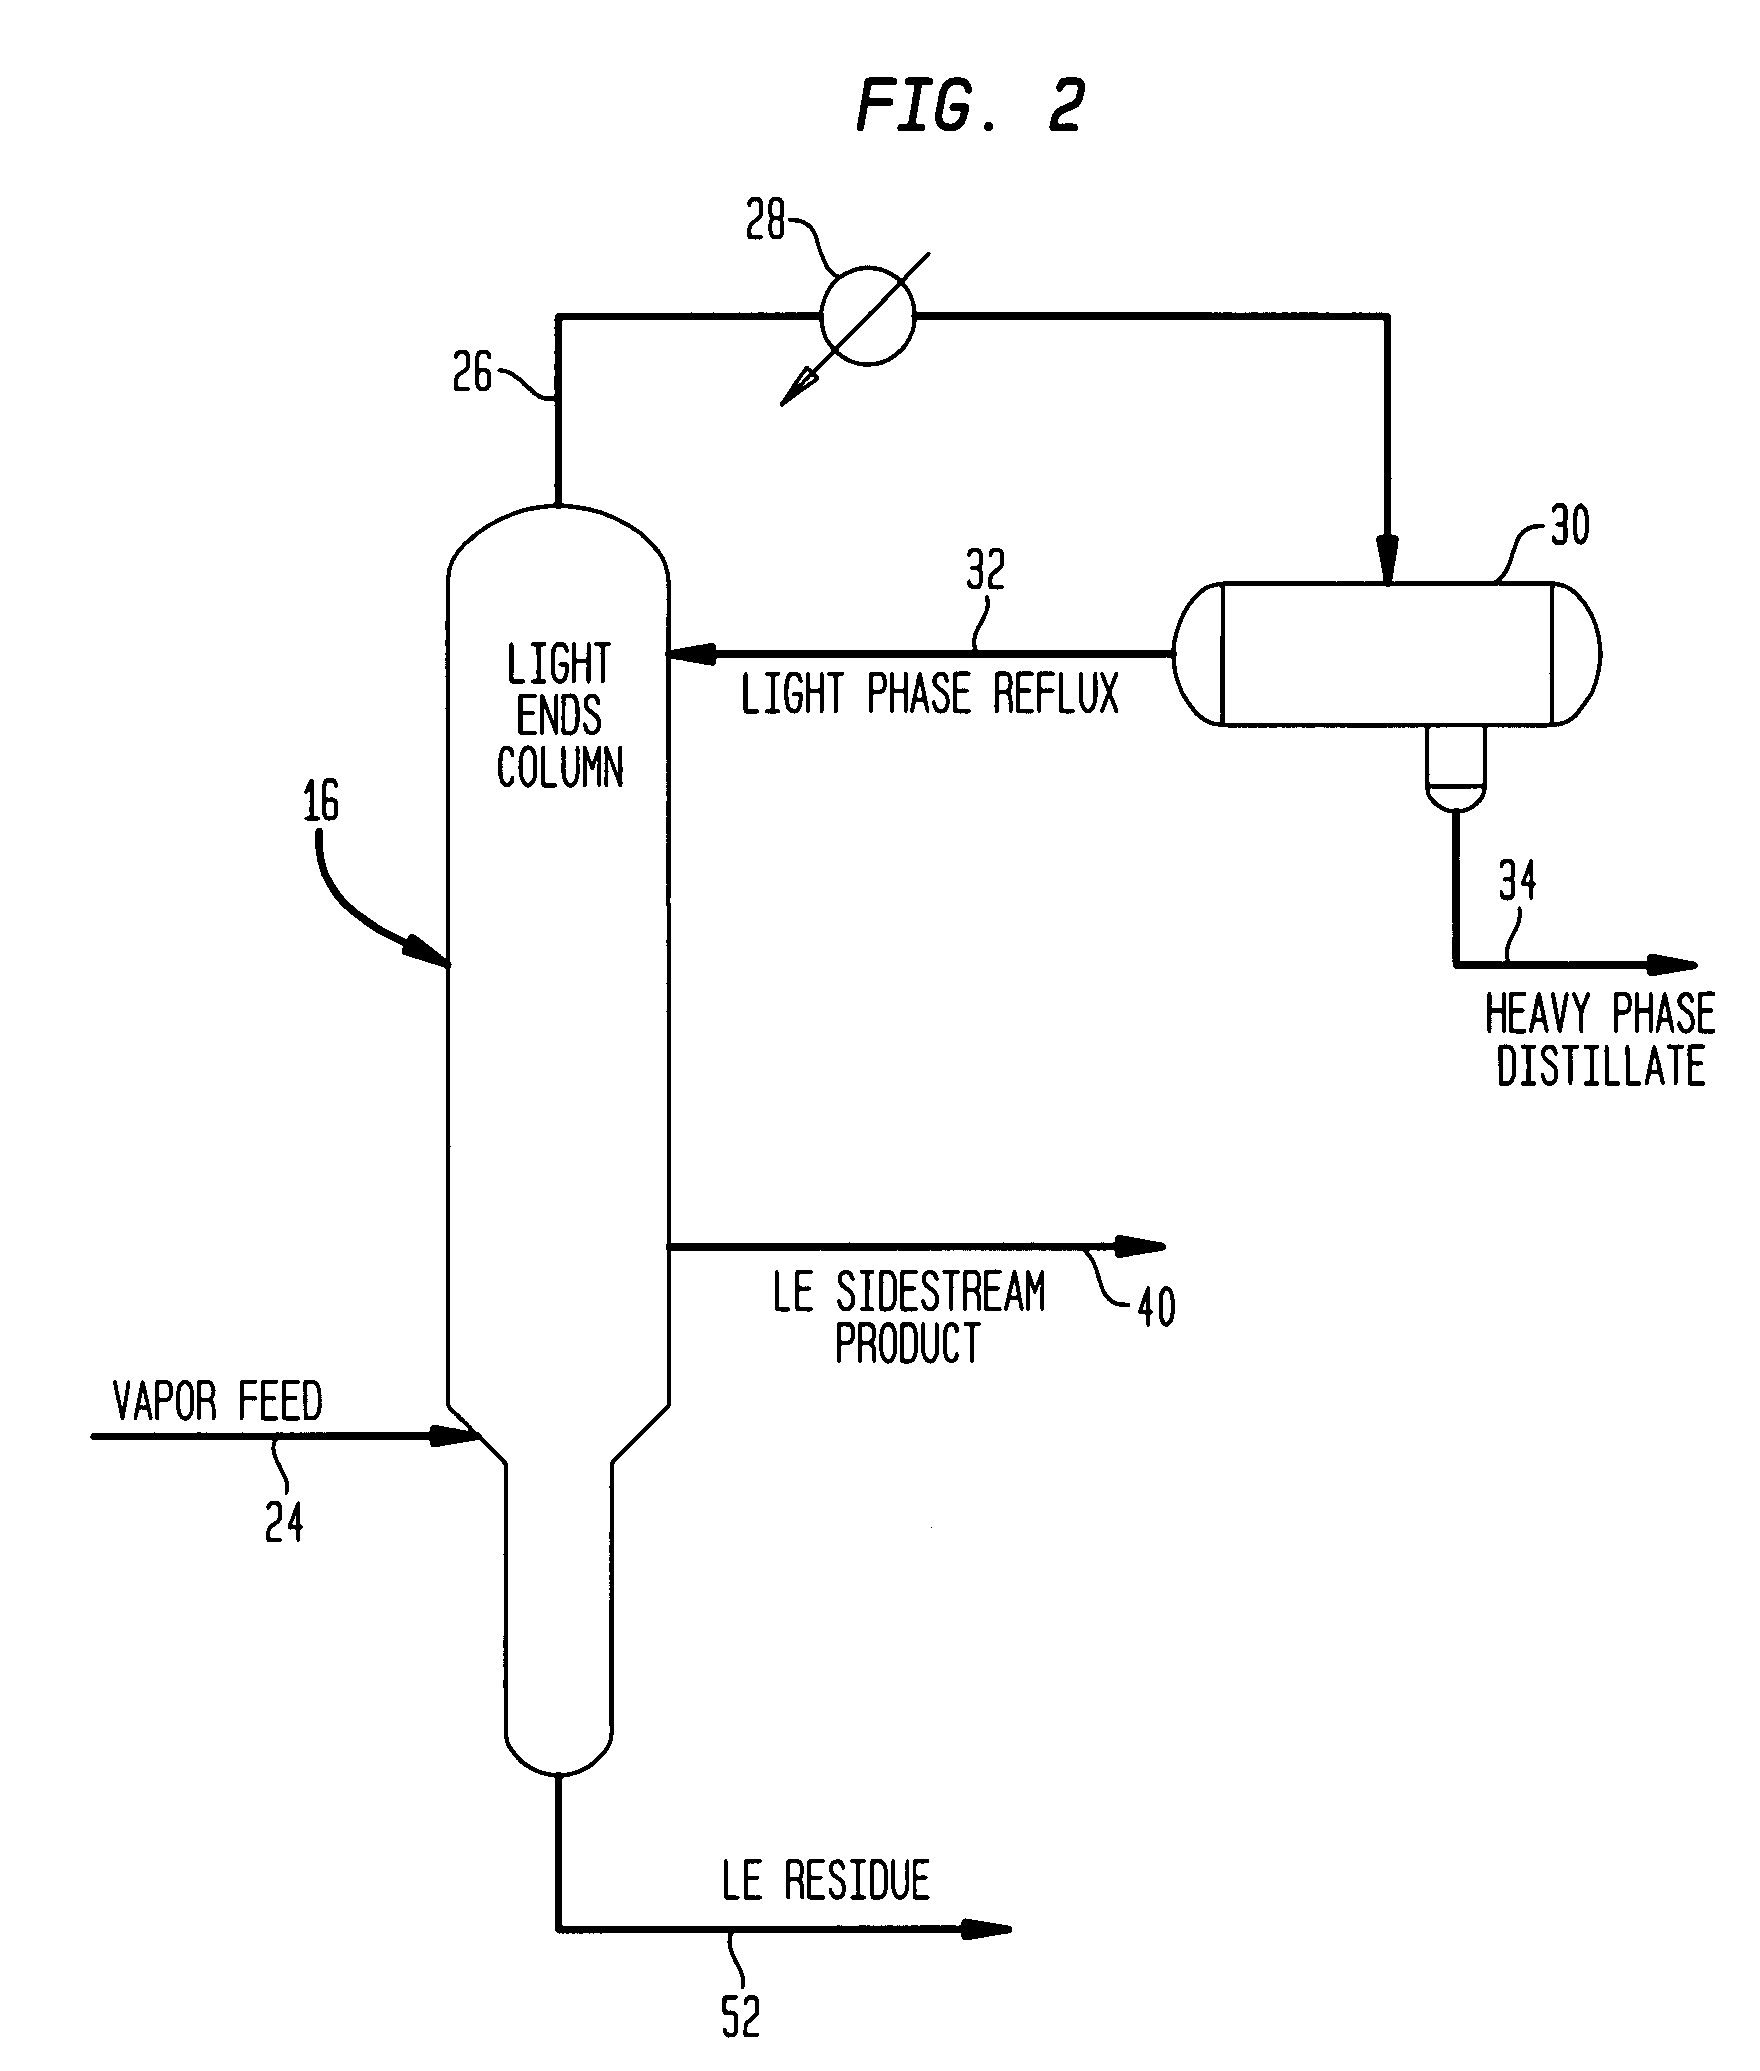 Method and apparatus for making acetic acid with improved purification